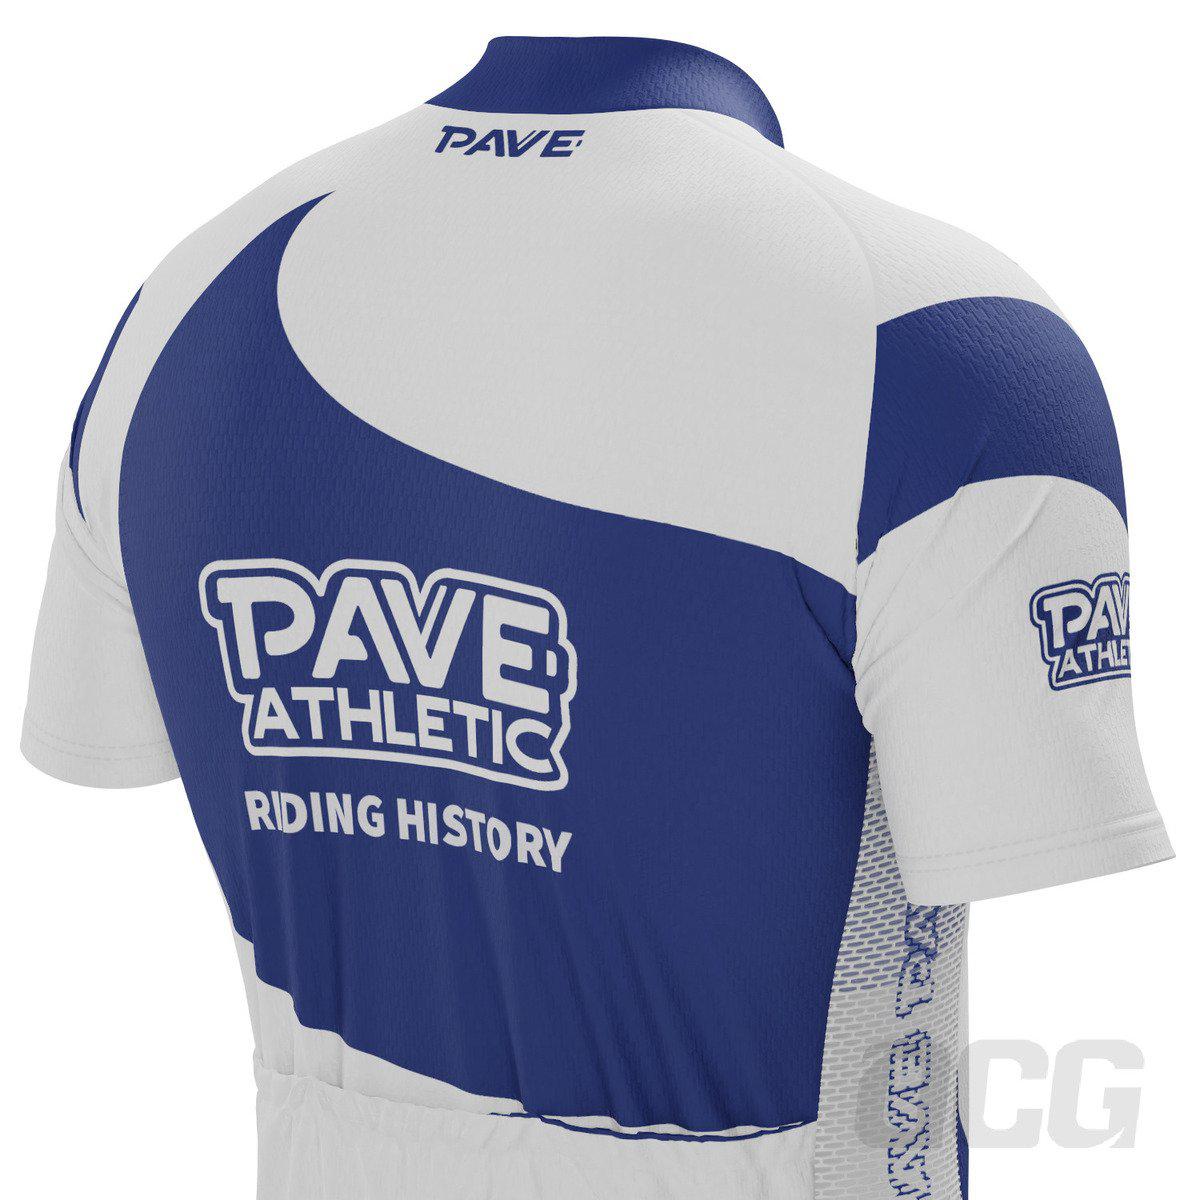 PAVE Athletic Silver Team Short Sleeve Cycling Kit